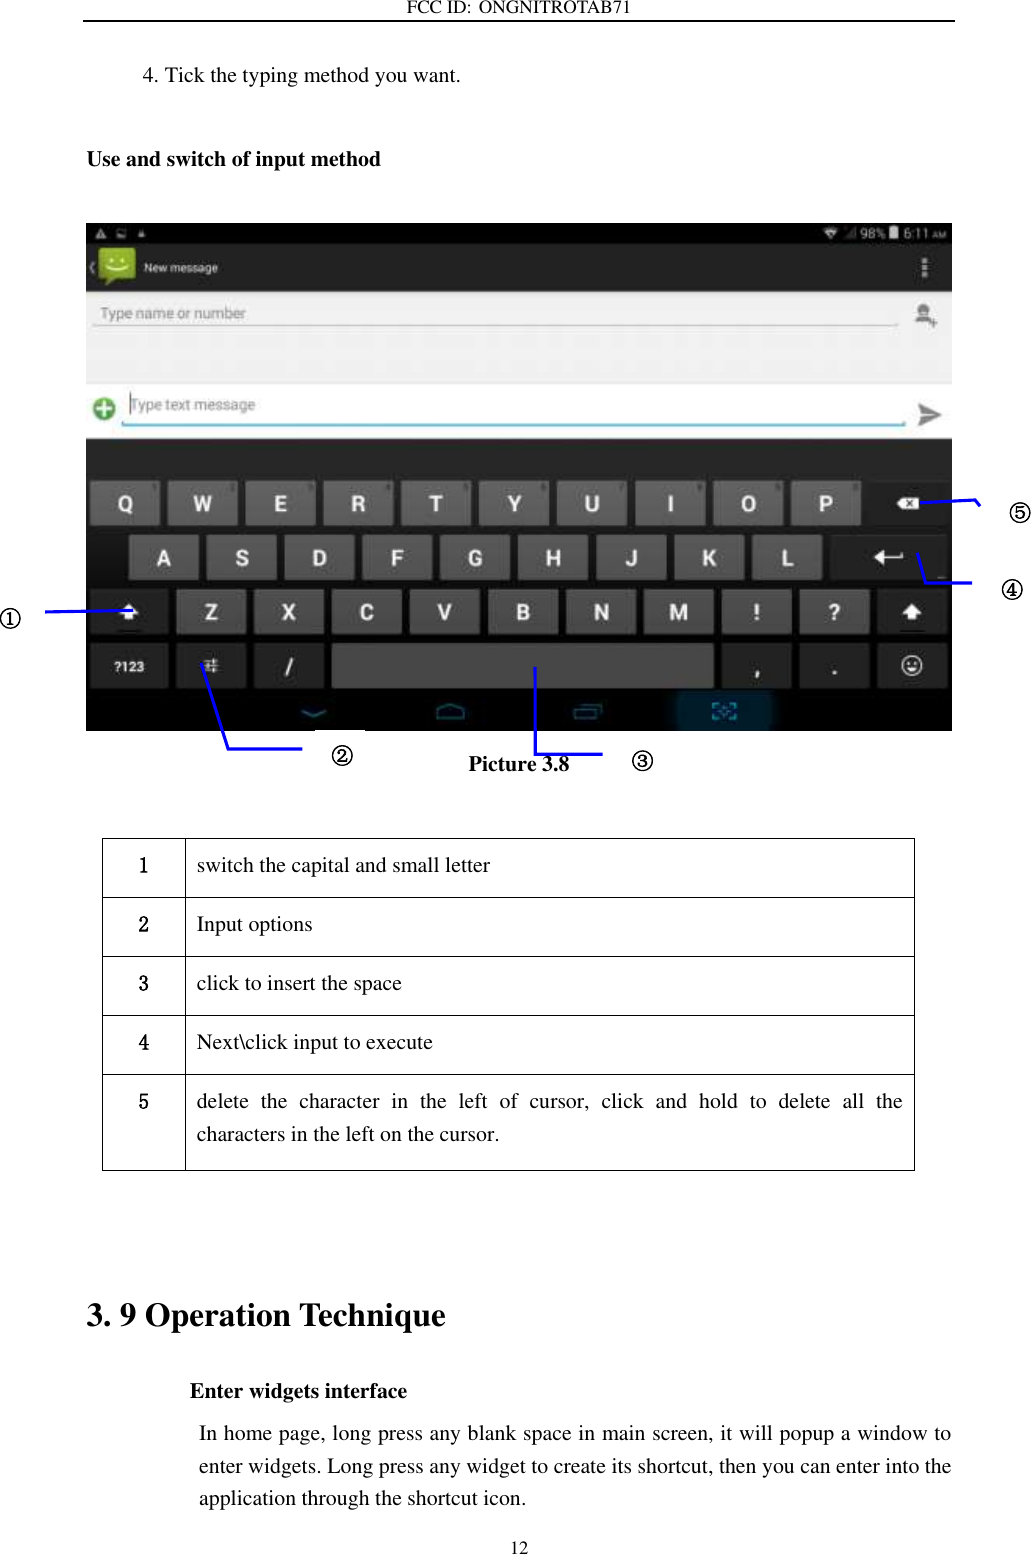 FCC ID: ONGNITROTAB71   12 4. Tick the typing method you want.  Use and switch of input method   Picture 3.8    3. 9 Operation Technique Enter widgets interface In home page, long press any blank space in main screen, it will popup a window to enter widgets. Long press any widget to create its shortcut, then you can enter into the application through the shortcut icon. 1 switch the capital and small letter   2 Input options 3 click to insert the space 4 Next\click input to execute 5 delete  the  character  in  the  left  of  cursor,  click  and  hold  to  delete  all  the characters in the left on the cursor. ① ② ③3 ⑤ ④ 